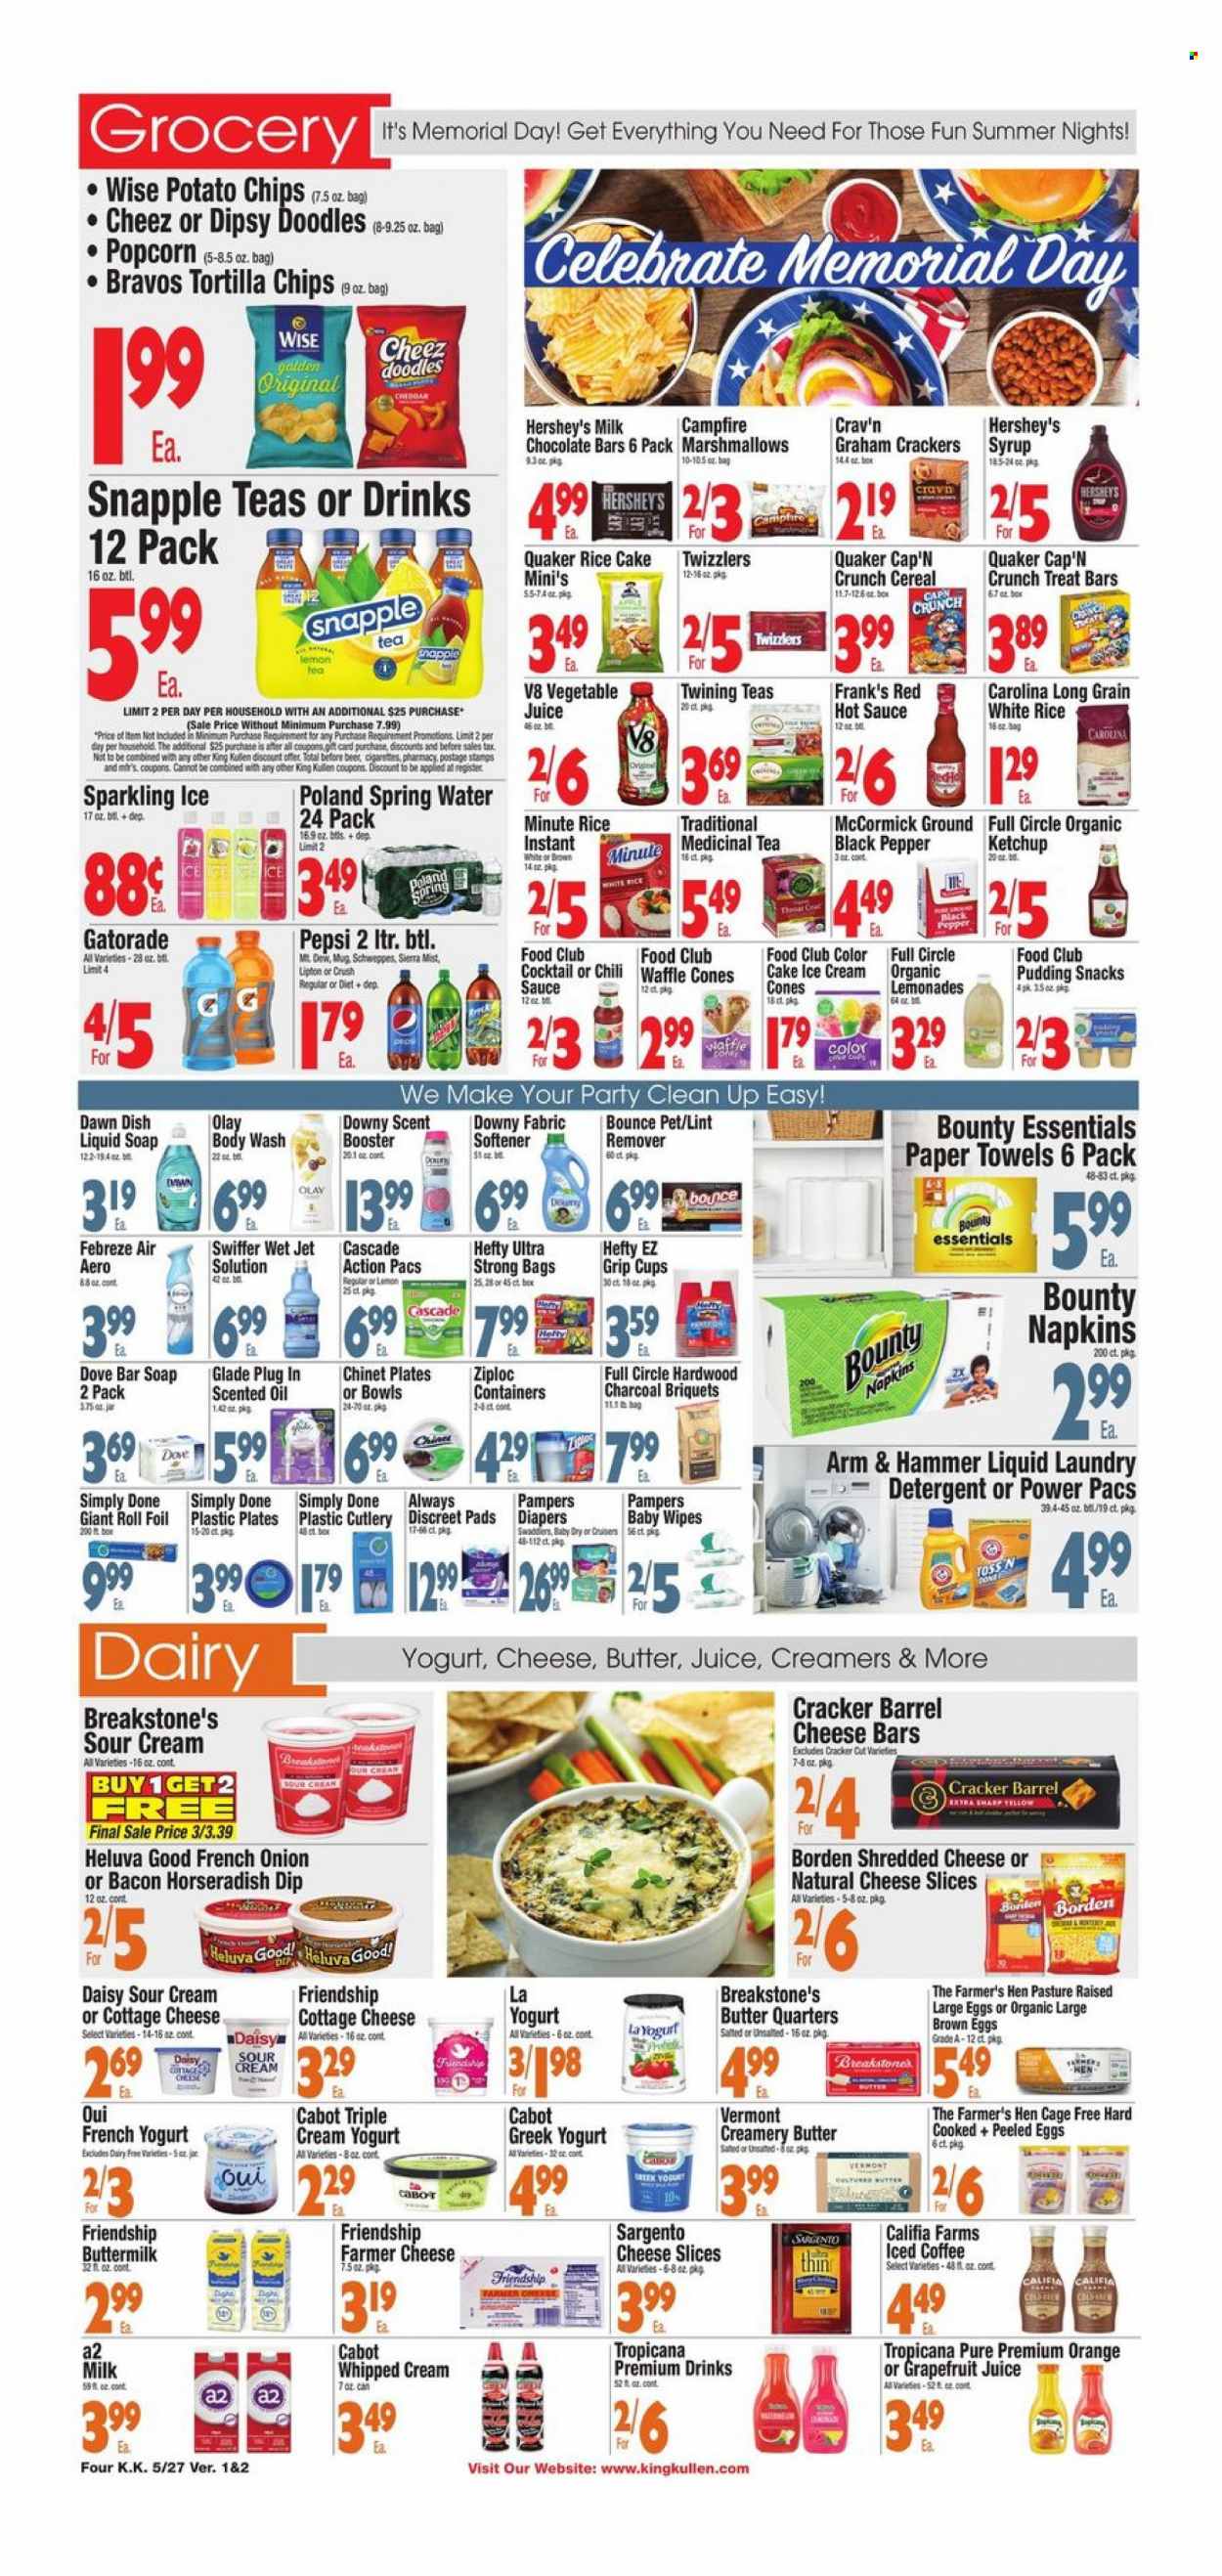 thumbnail - King Kullen Flyer - 05/27/2022 - 06/02/2022 - Sales products - horseradish, onion, oranges, sauce, Quaker, bacon, cottage cheese, farmer cheese, shredded cheese, sliced cheese, Sargento, greek yoghurt, pudding, yoghurt, buttermilk, cage free eggs, large eggs, sour cream, whipped cream, dip, ice cream, Hershey's, graham crackers, marshmallows, snack, Bounty, crackers, chocolate bar, tortilla chips, potato chips, chips, popcorn, ARM & HAMMER, cereals, Cap'n Crunch, rice, white rice, hot sauce, ketchup, syrup, Schweppes, Pepsi, juice, Lipton, Snapple, Sierra Mist, vegetable juice, Gatorade, spring water, iced coffee, tea, beer, wipes, Pampers, baby wipes, napkins, nappies, Dove, kitchen towels, paper towels, detergent, Febreze, Swiffer, Cascade, fabric softener, Bounce, Downy Laundry, dishwashing liquid, Jet, body wash, soap bar, soap, sanitary pads, Olay, Ziploc, Hefty, Glade, scented oil. Page 4.